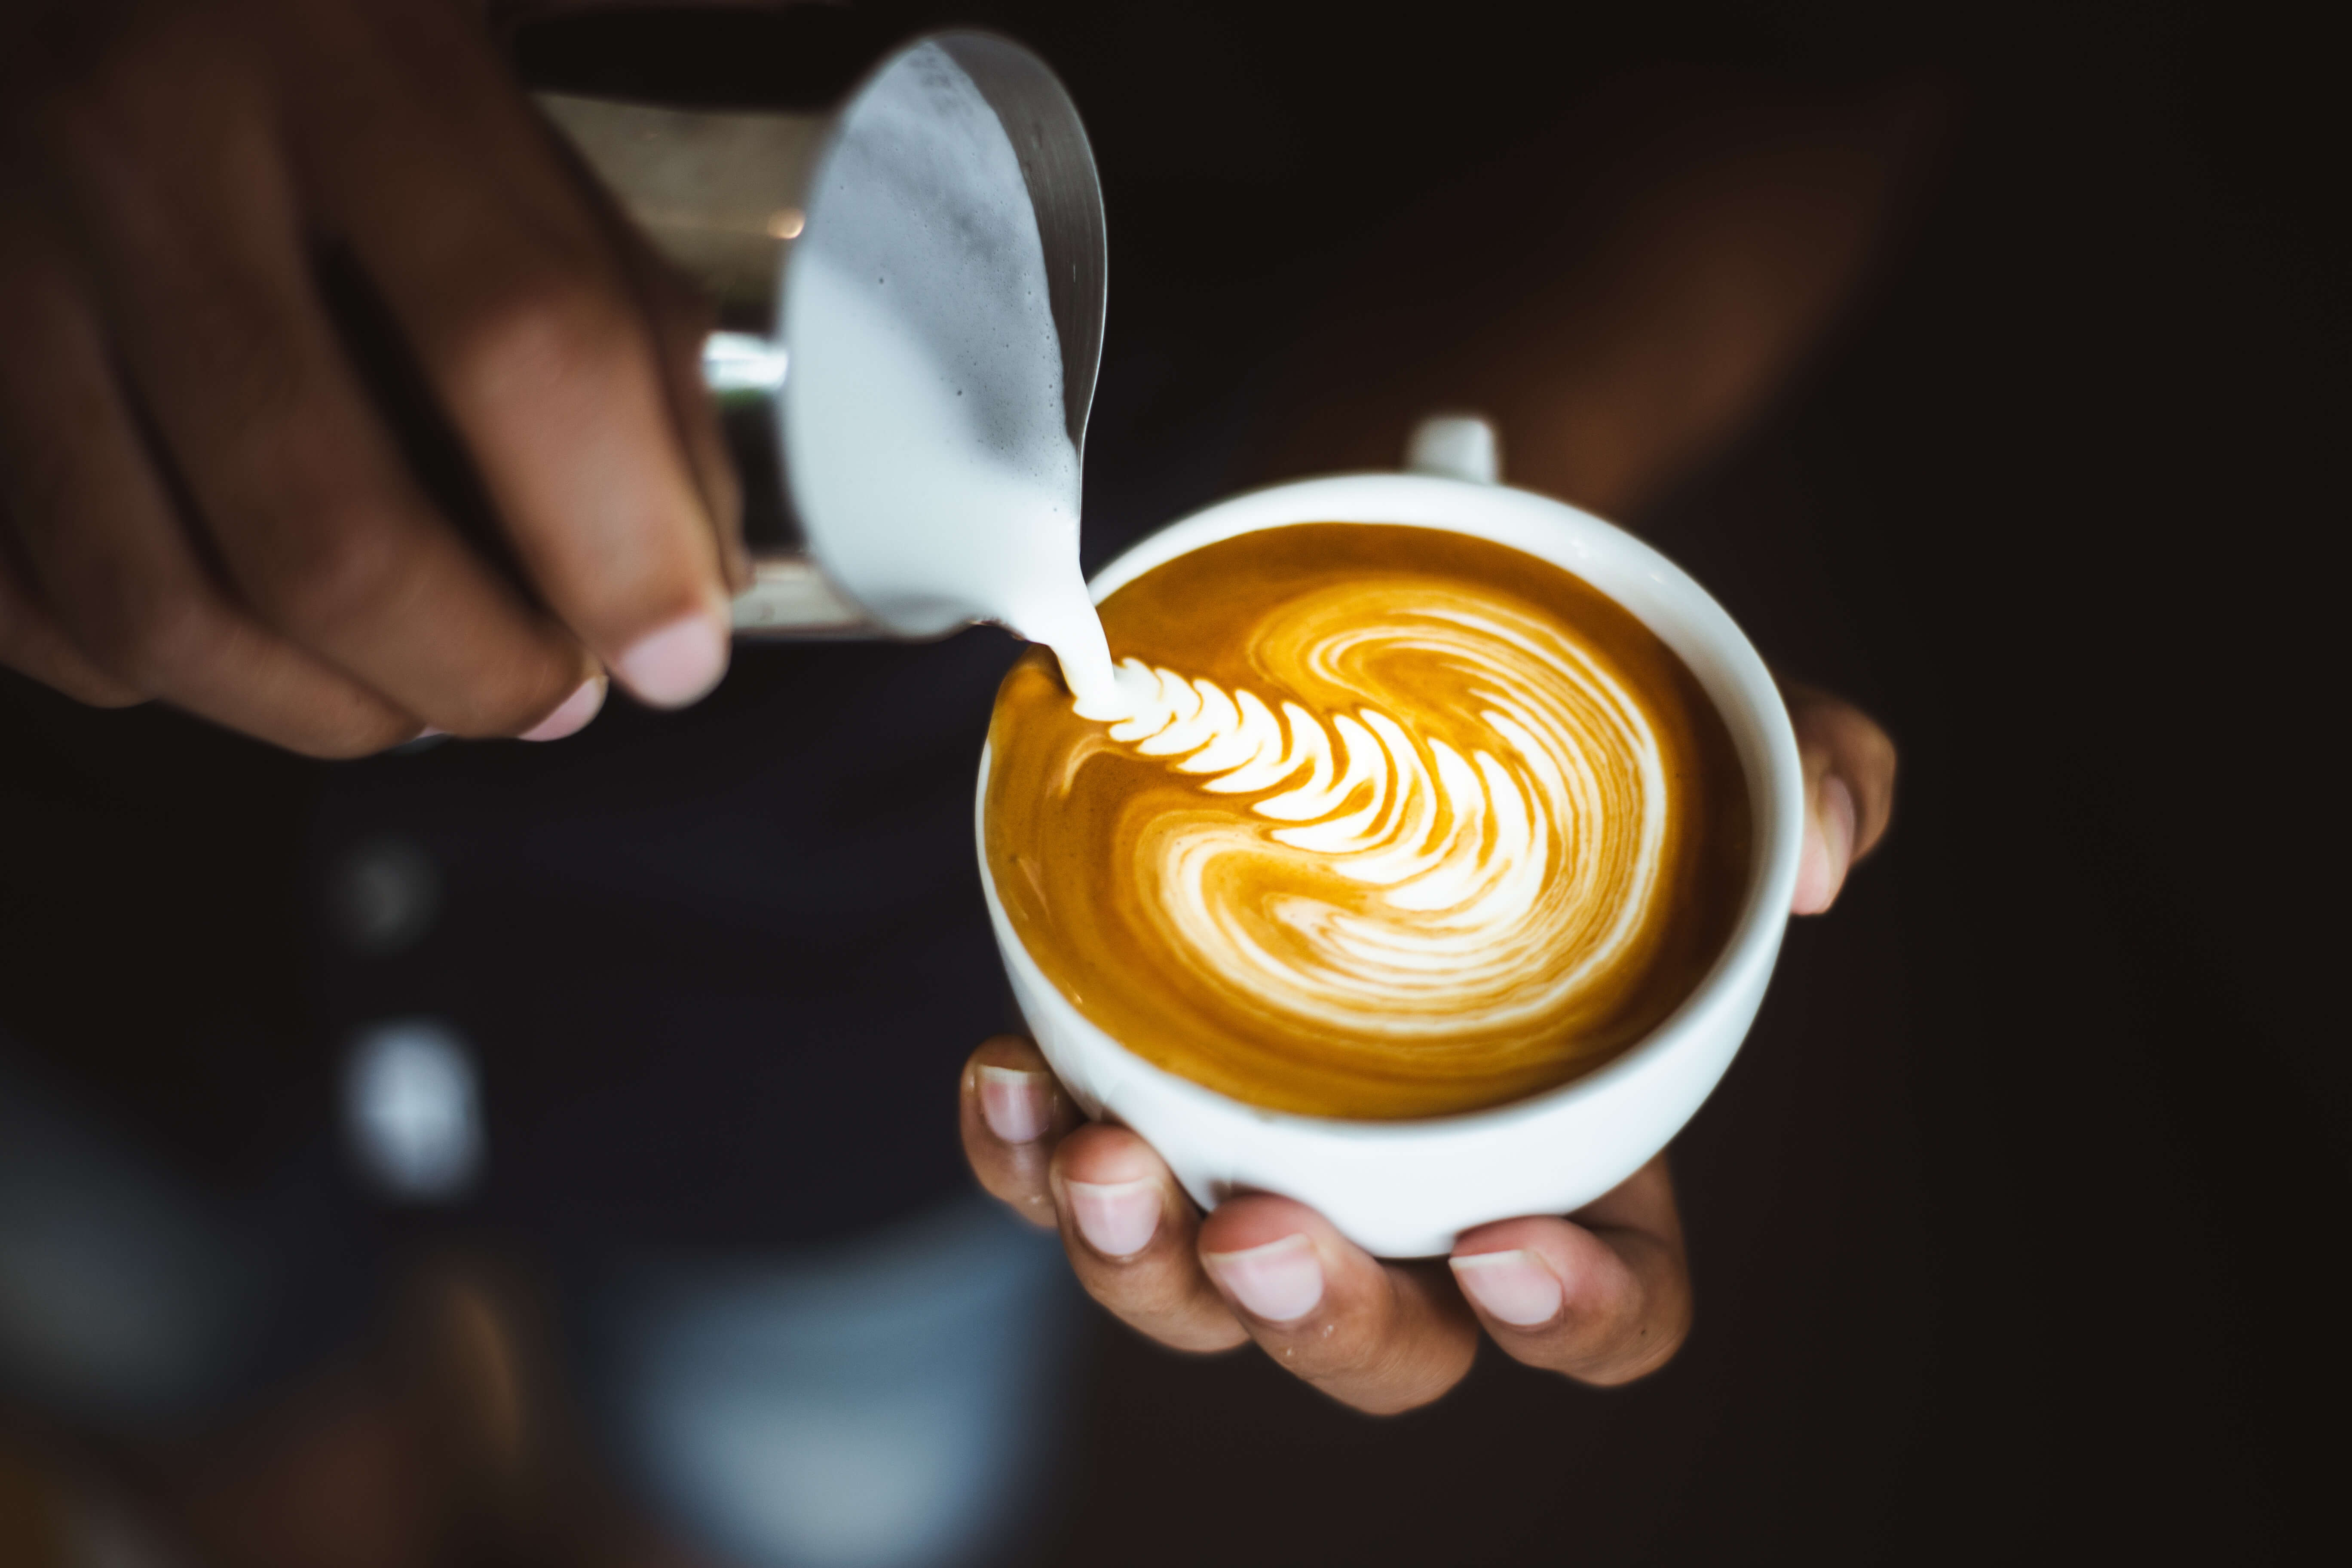 How to make latte art: 5 patterns for beginners